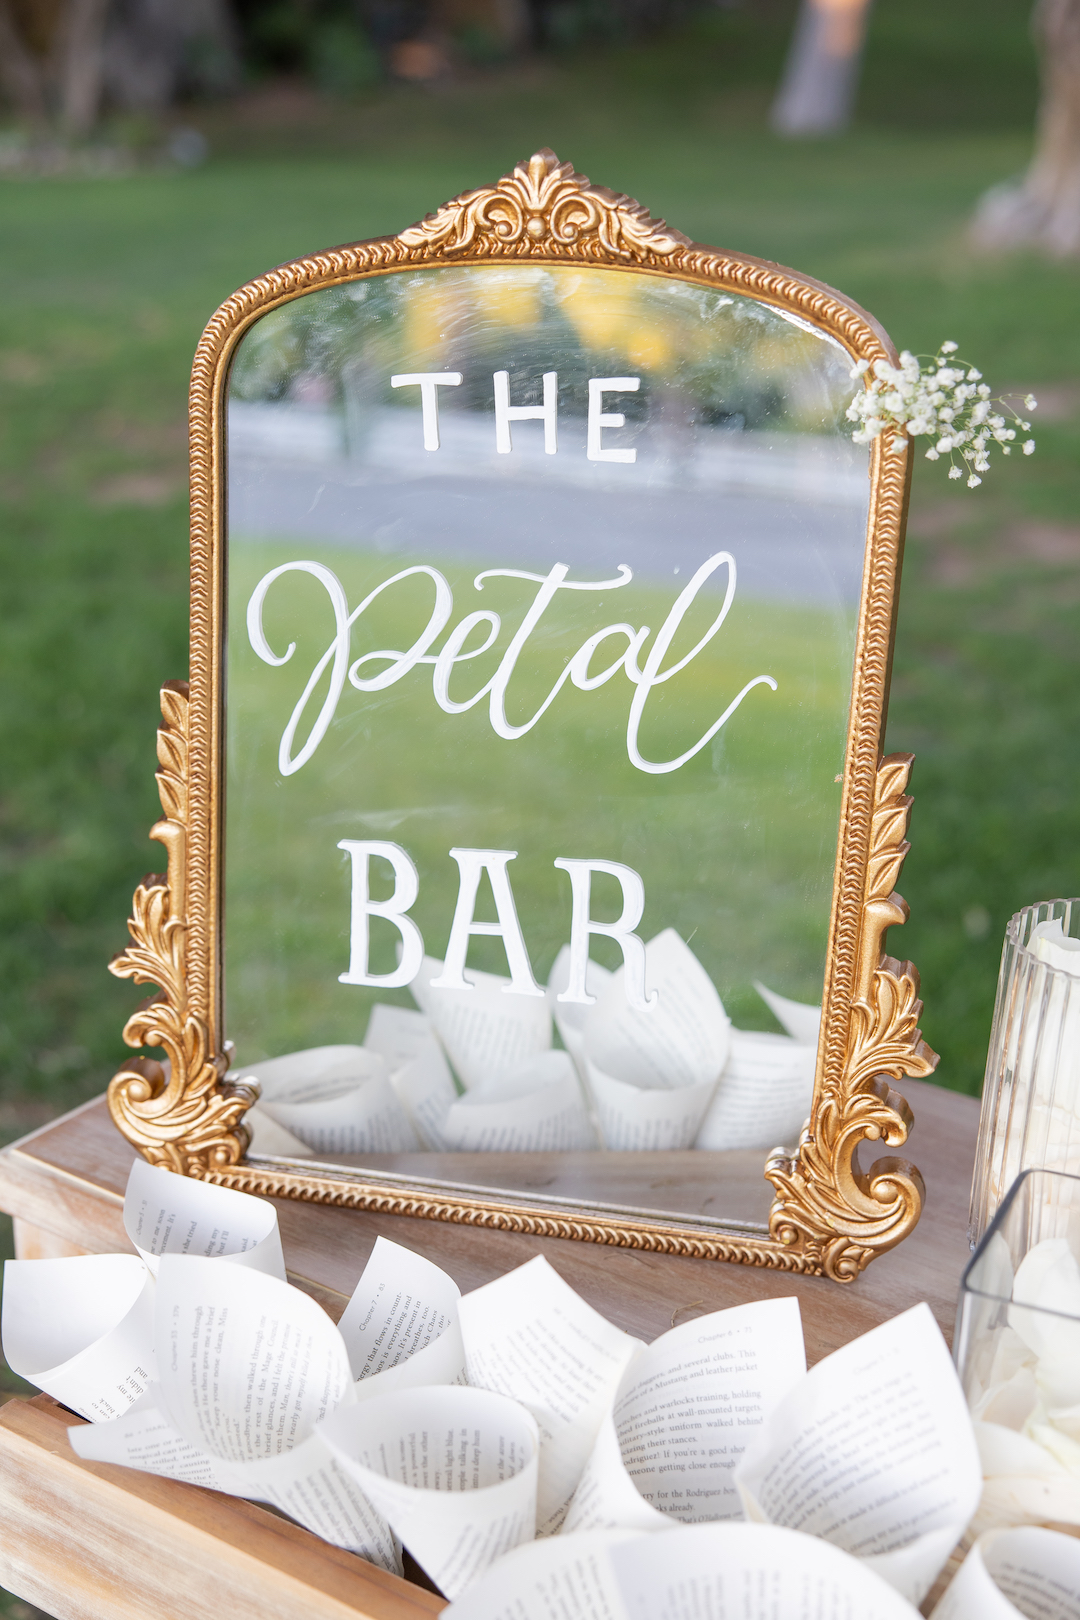 Vintage gold mirror with vinyl lettering that says "The Petal Bar" wedding welcome table decor.